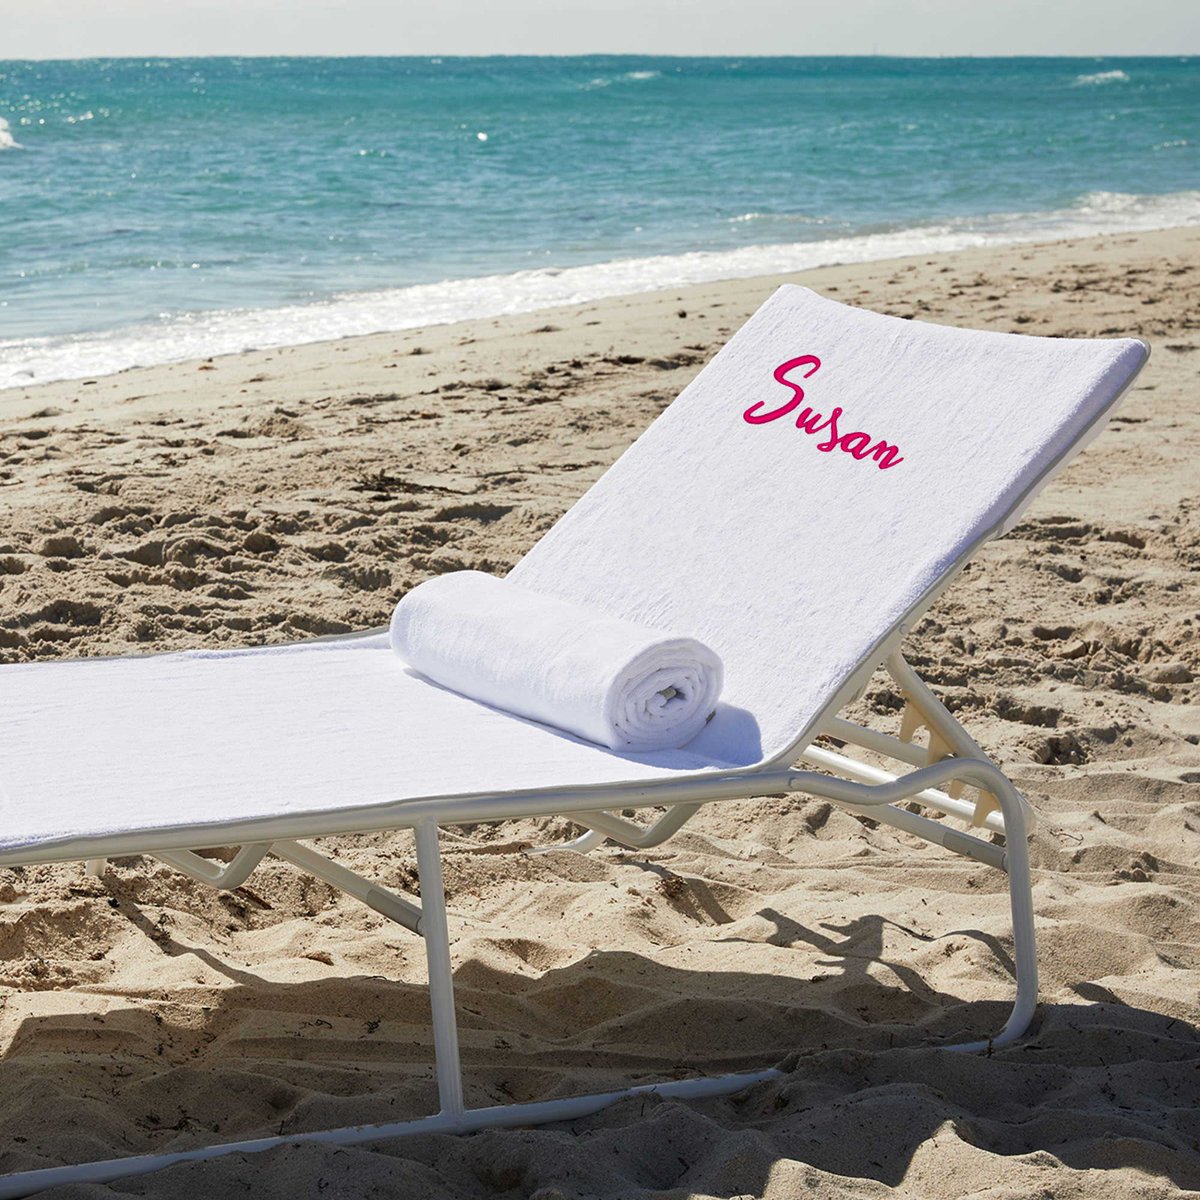 30% off Sitewide w/Free UPS Ground Shipping! Personalized Quick-Dry Lounge Chair Covers loom.ly/wQr99ng 
#loungechair #beachtowel #turkishtowel #monogrammedtowels #chaiselounge #personalizedtowel #beachcover #pooltowel #cabanatowel #etsy #logodesign #customtowel #handmade